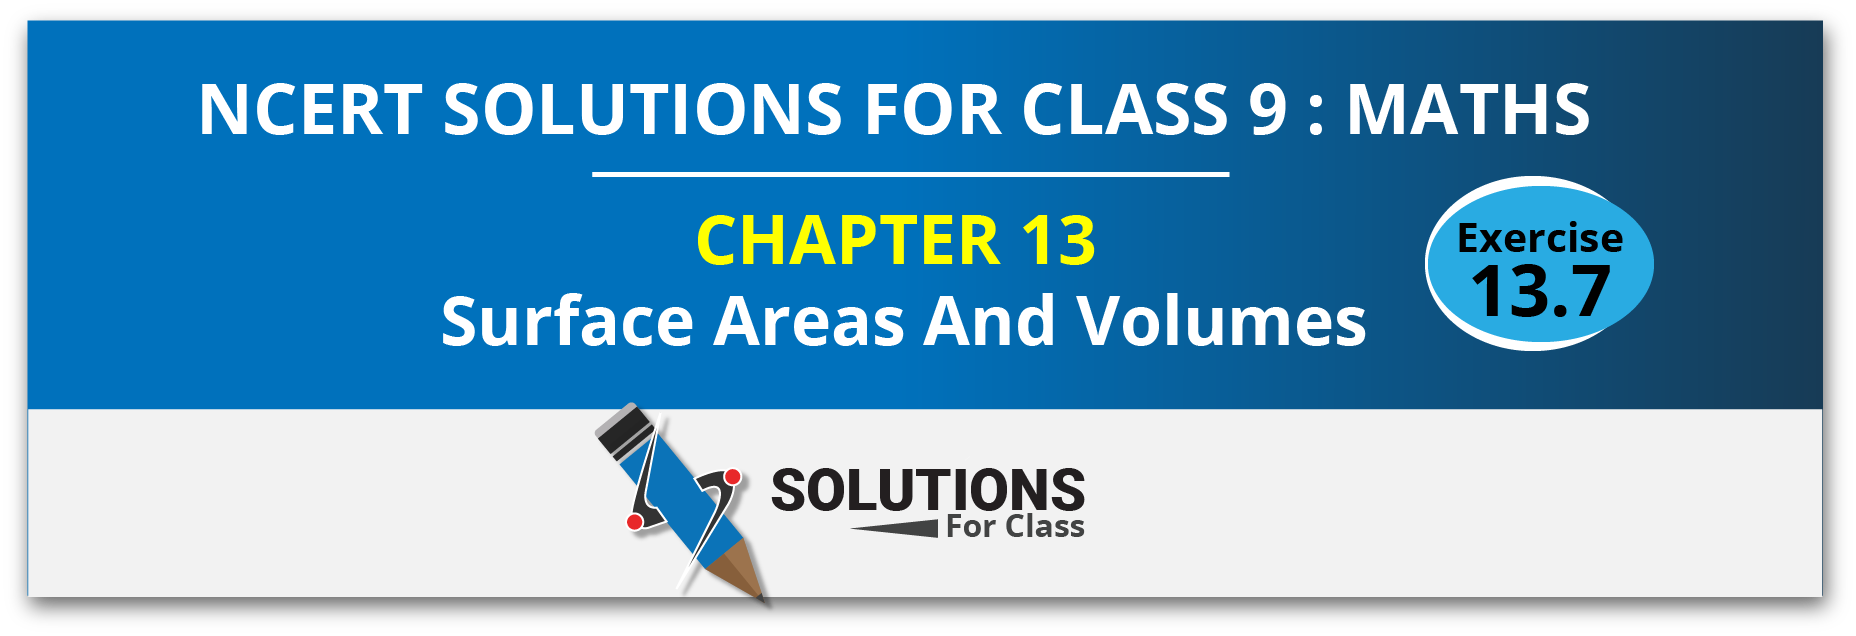 NCERT Solution For Class 9, Maths, Chapter 13, Surface Areas And Volumes, Exercise 13.7